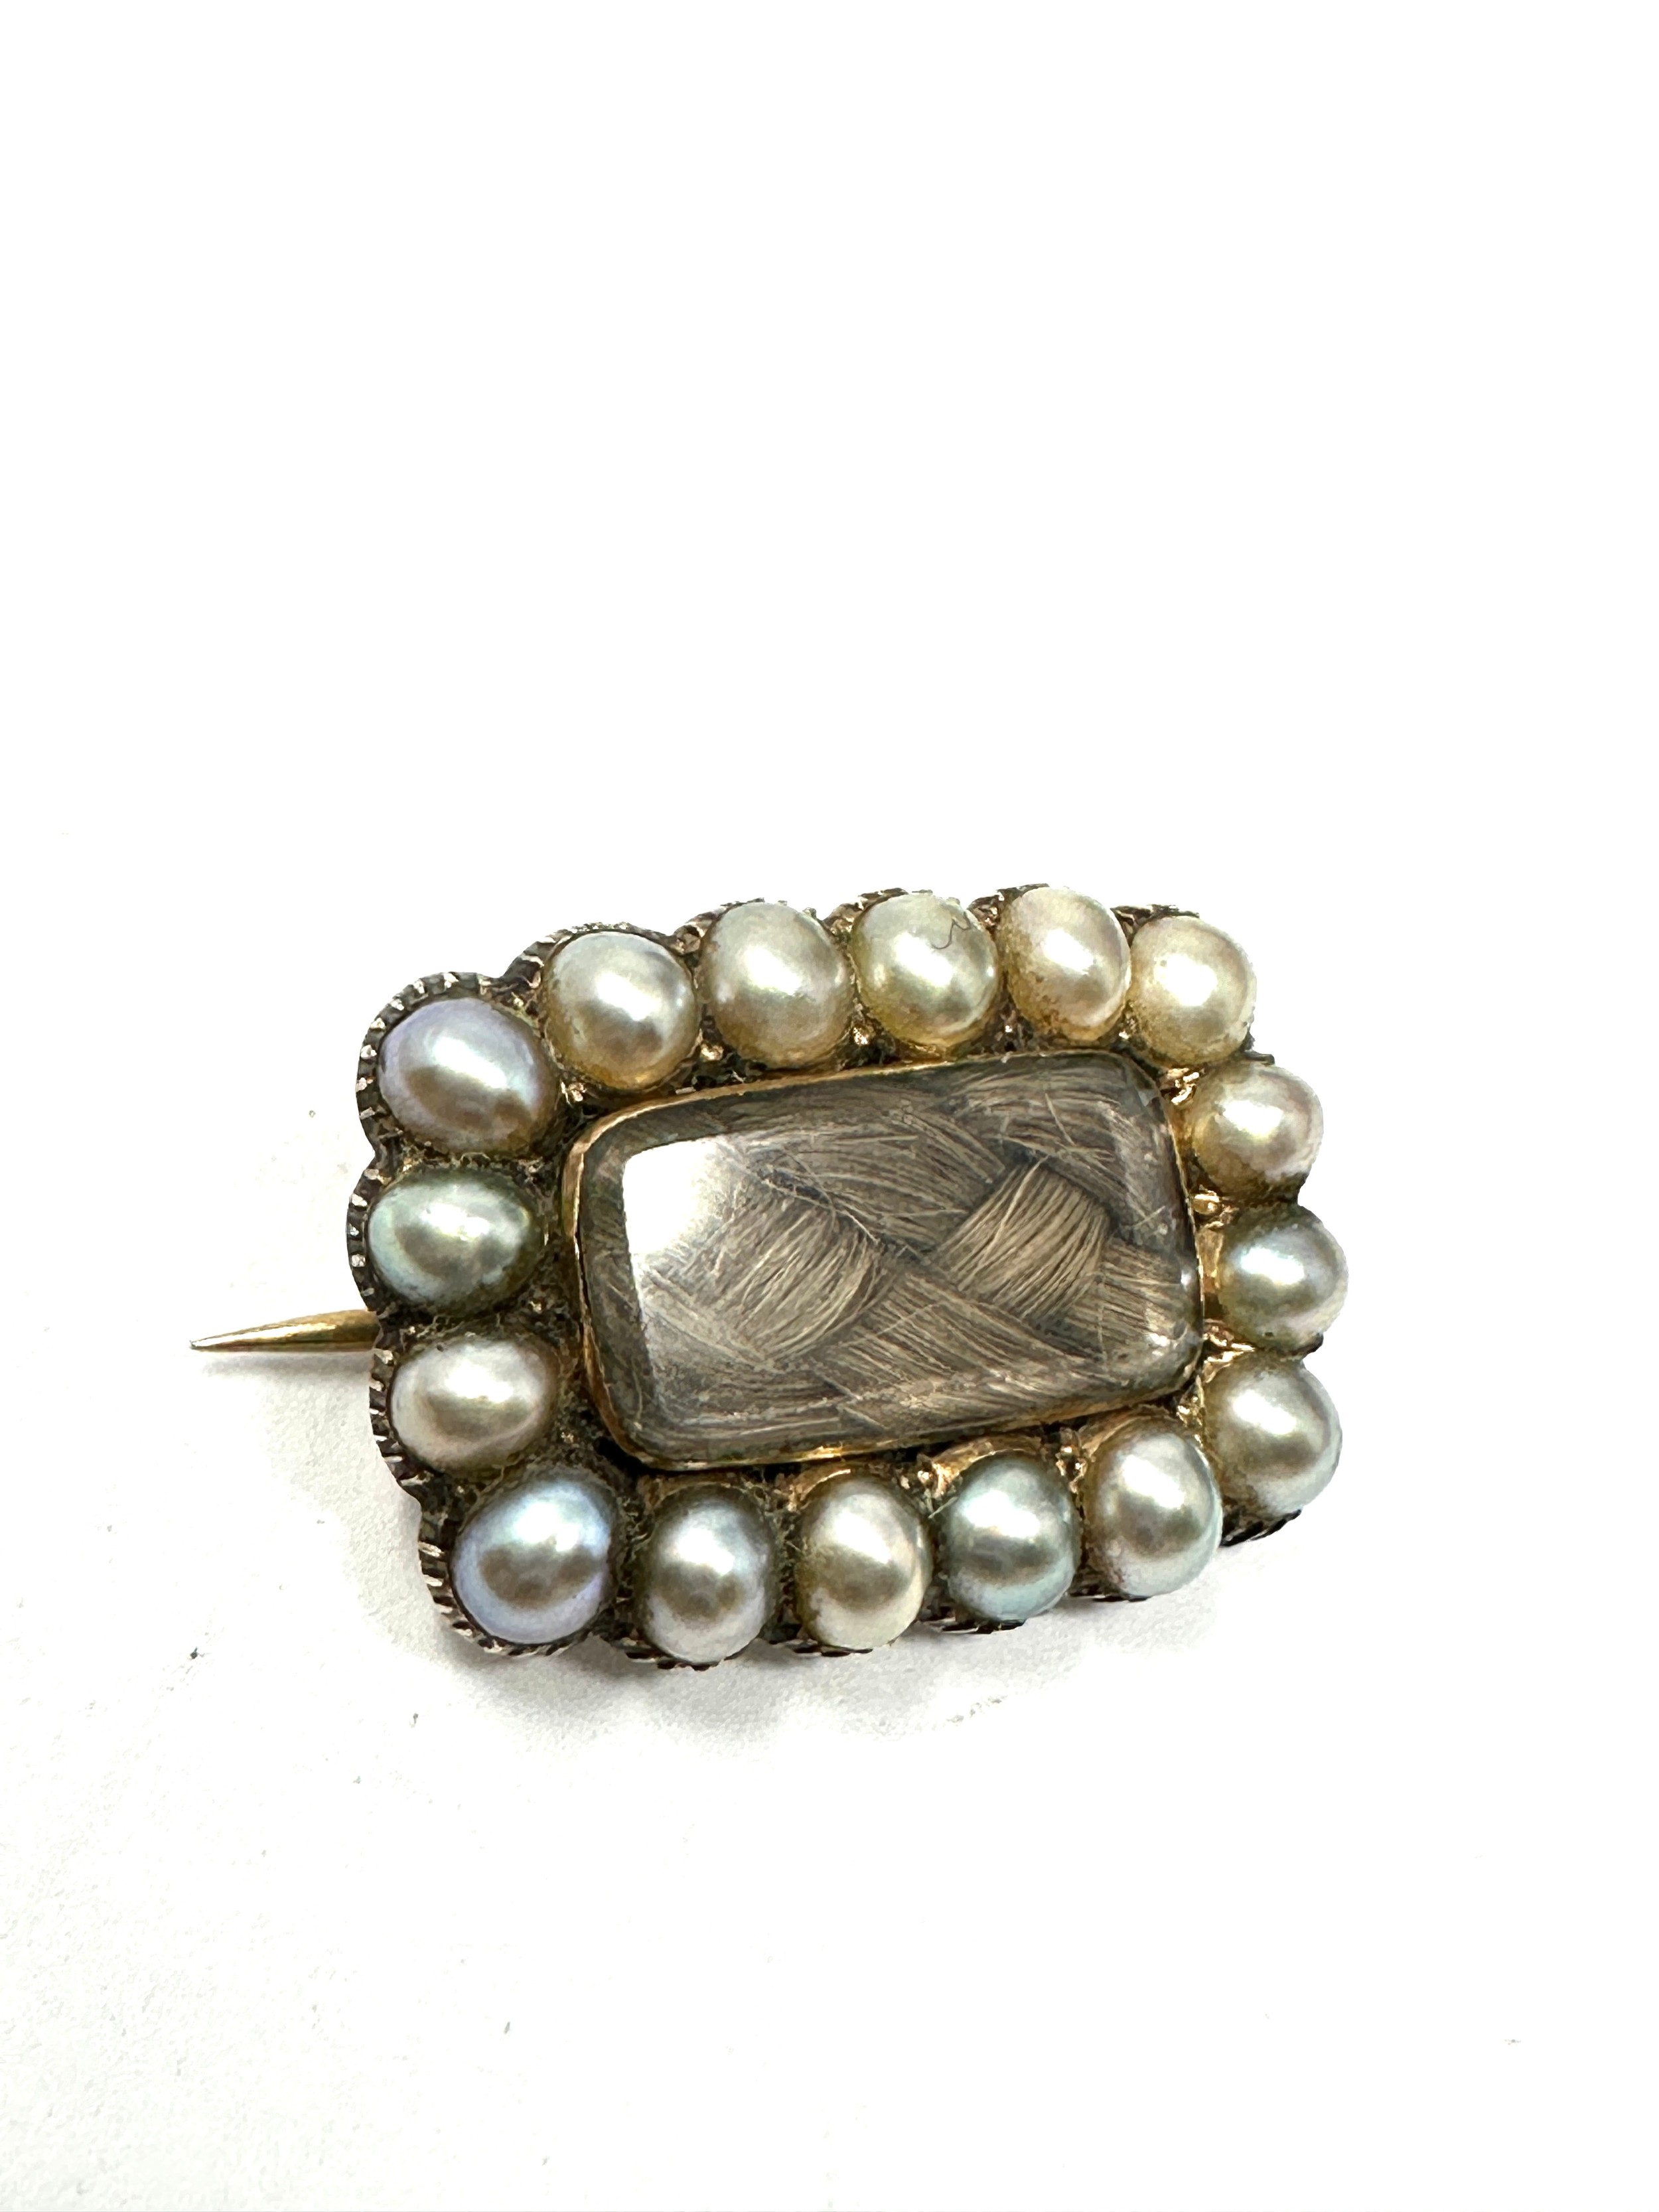 Antique gold & pearl mourning brooch (5g)